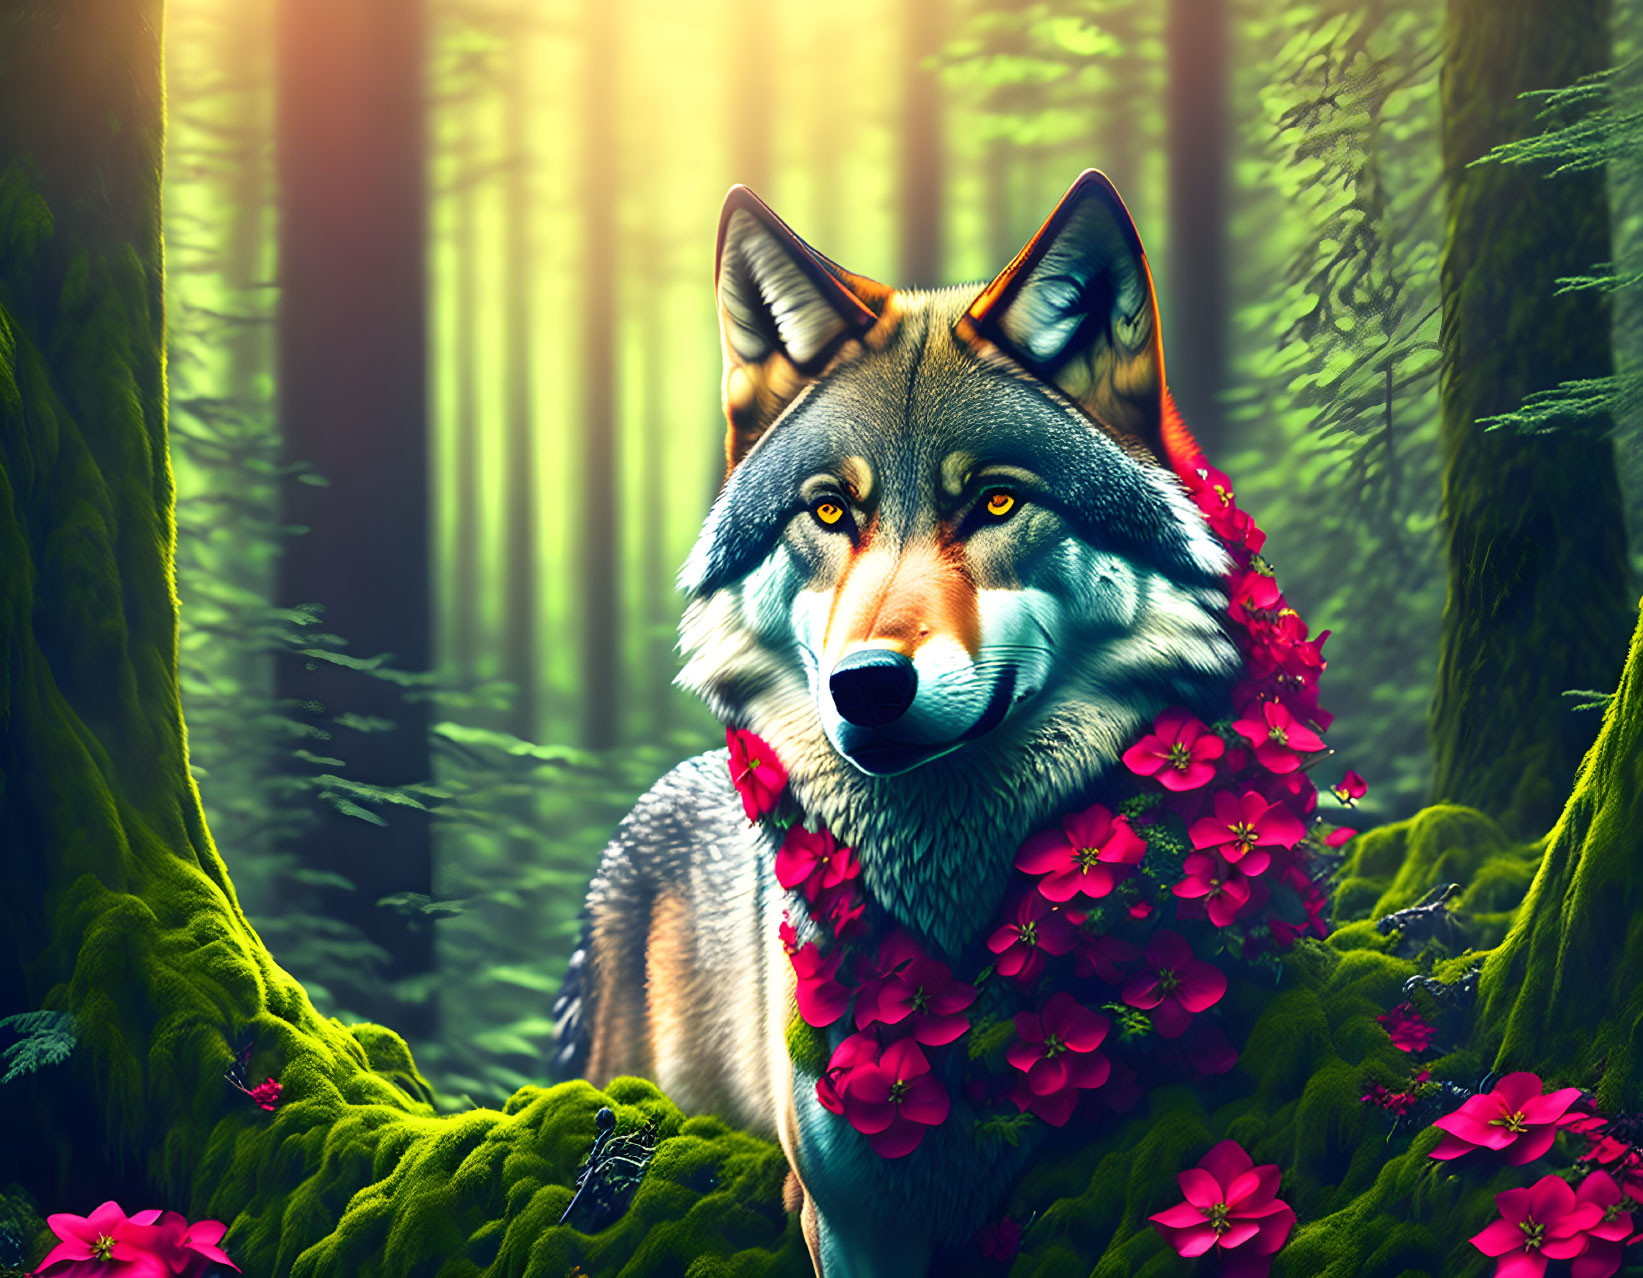 Realistic Wolf Digital Illustration with Vibrant Flowers in Forest